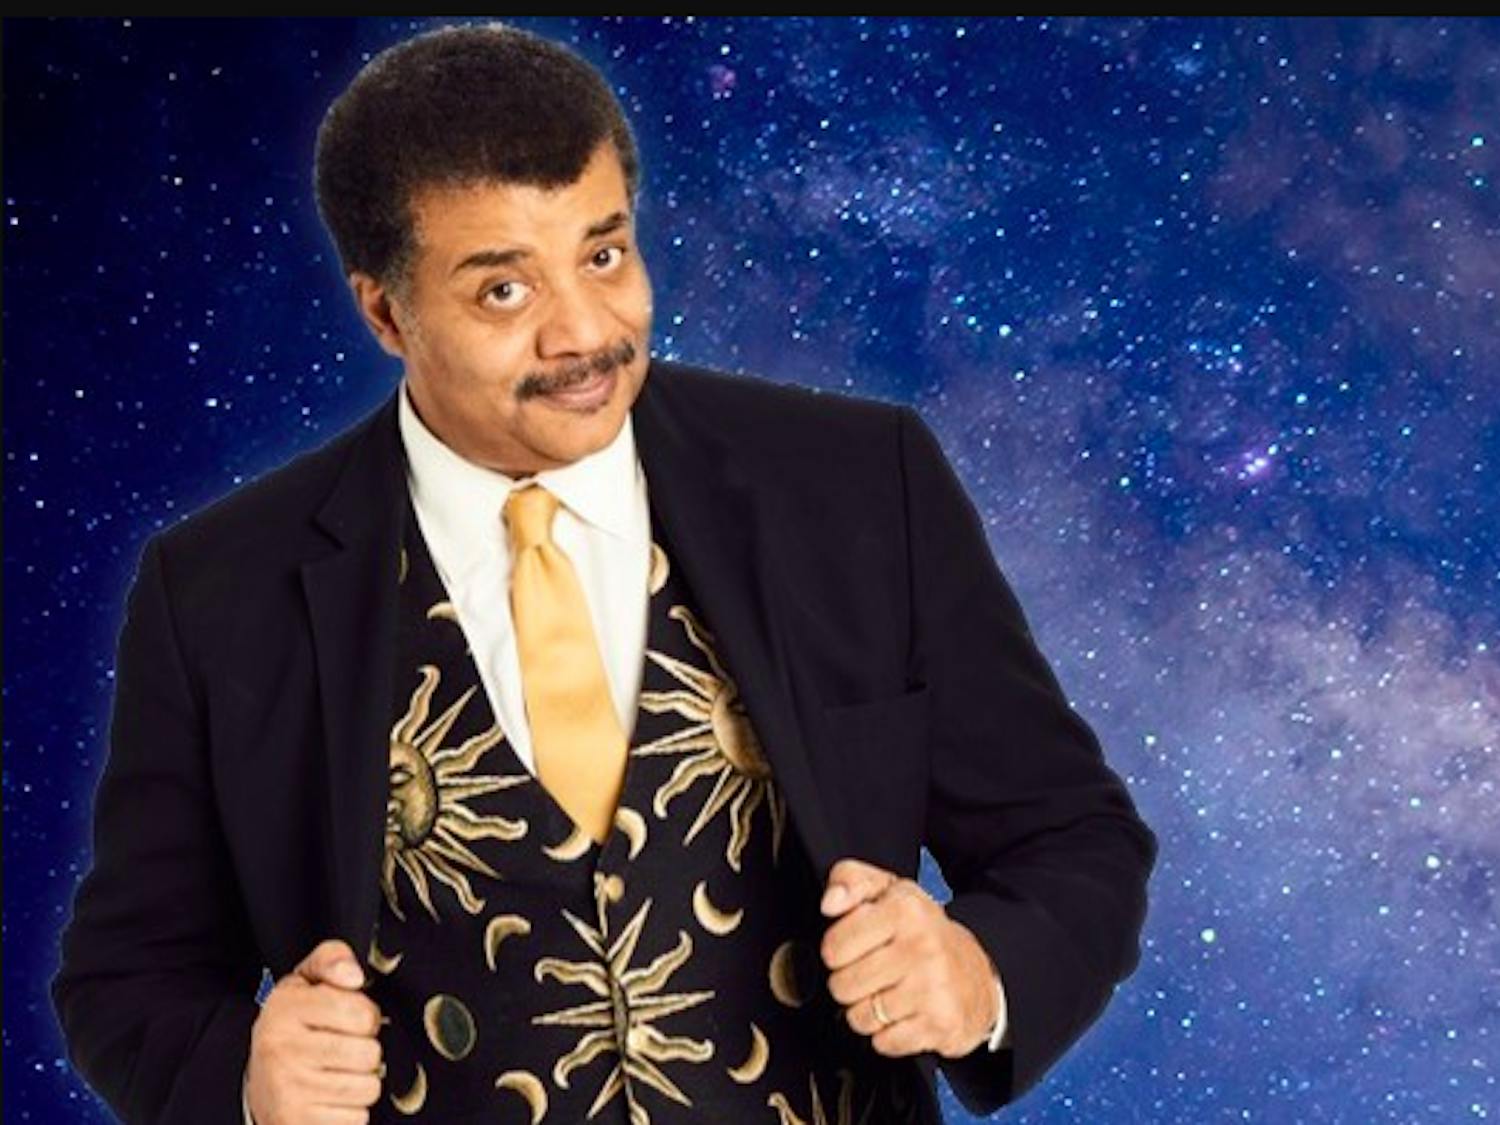 A flyer of famous astrophysicist Neil Degrasse Tyson. Tyson's 2023 tour comes to the Koger Center on Wednesday where he will share his knowledge on recent scientific discoveries.